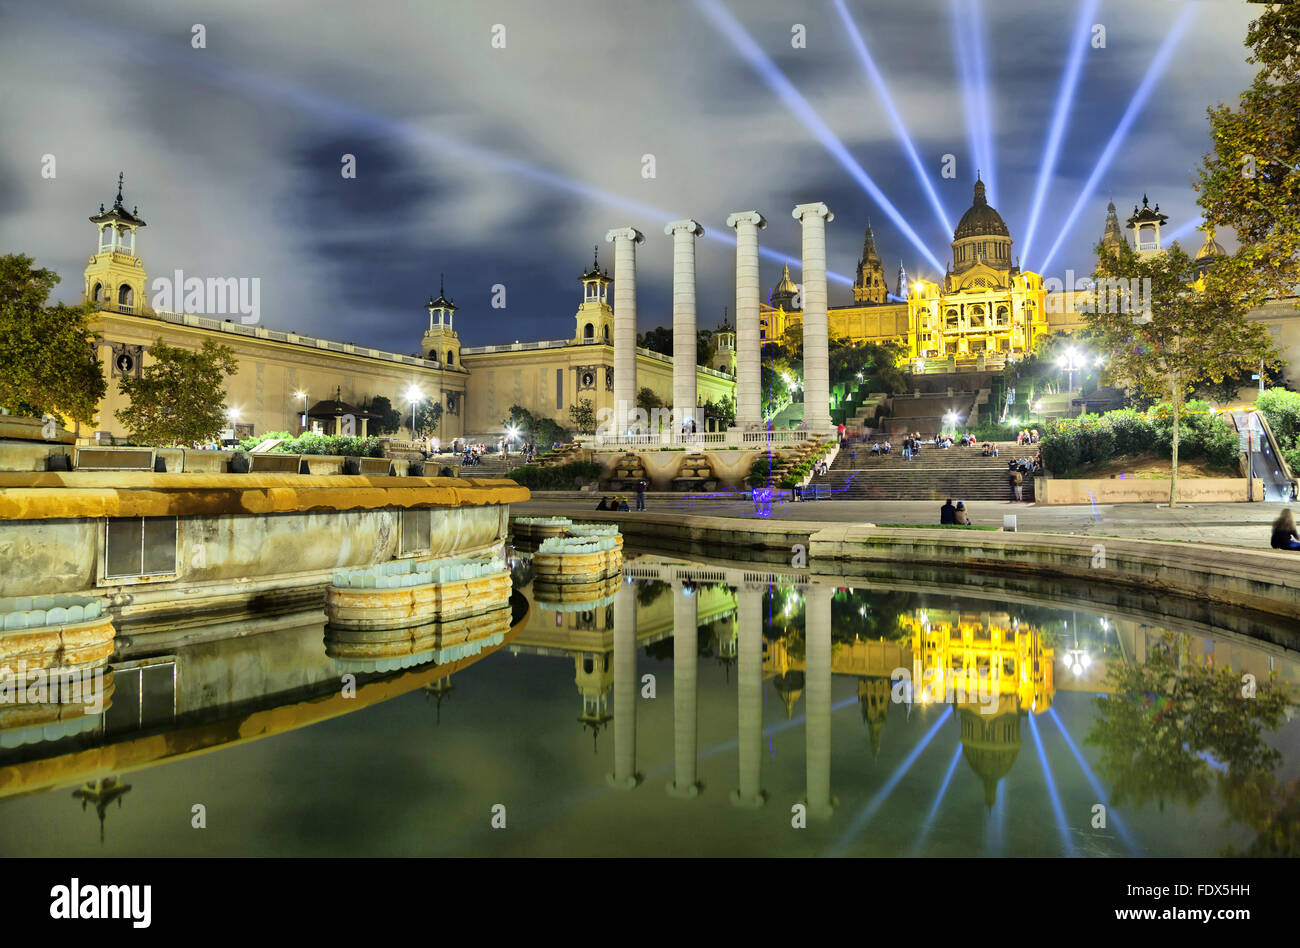 Building of Museum of Catalonia reflecting in water of fountain, Barcelona, Spain Stock Photo